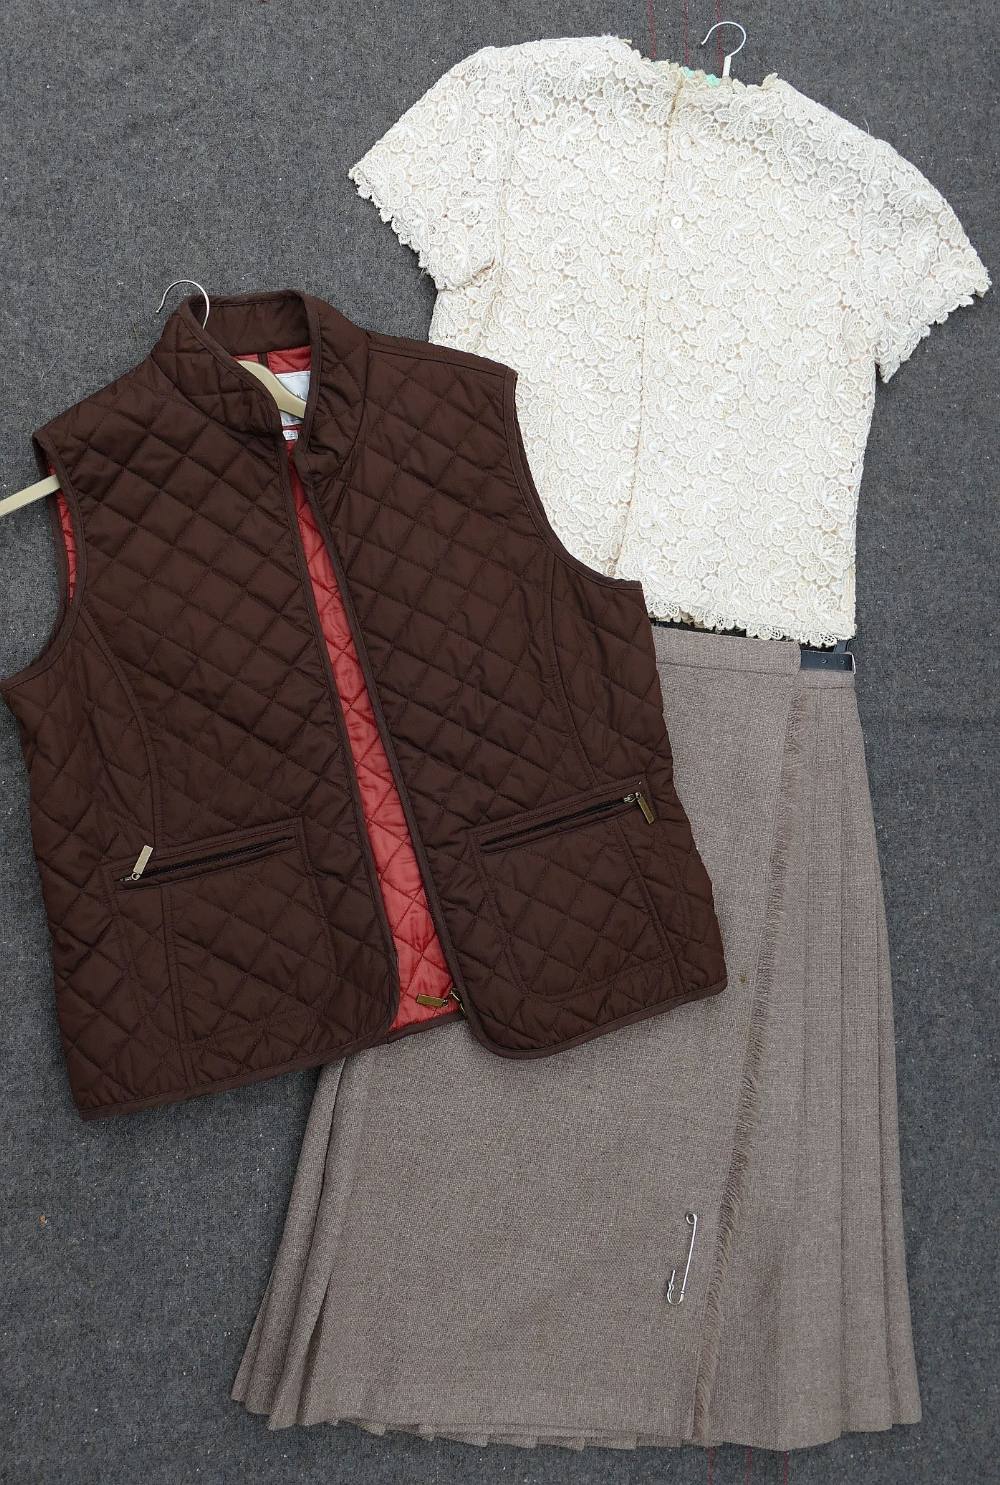 A Dermore of Mayfair blouse, a vintage woollen pleated shirt and a Van Heusen brown ladies quilted